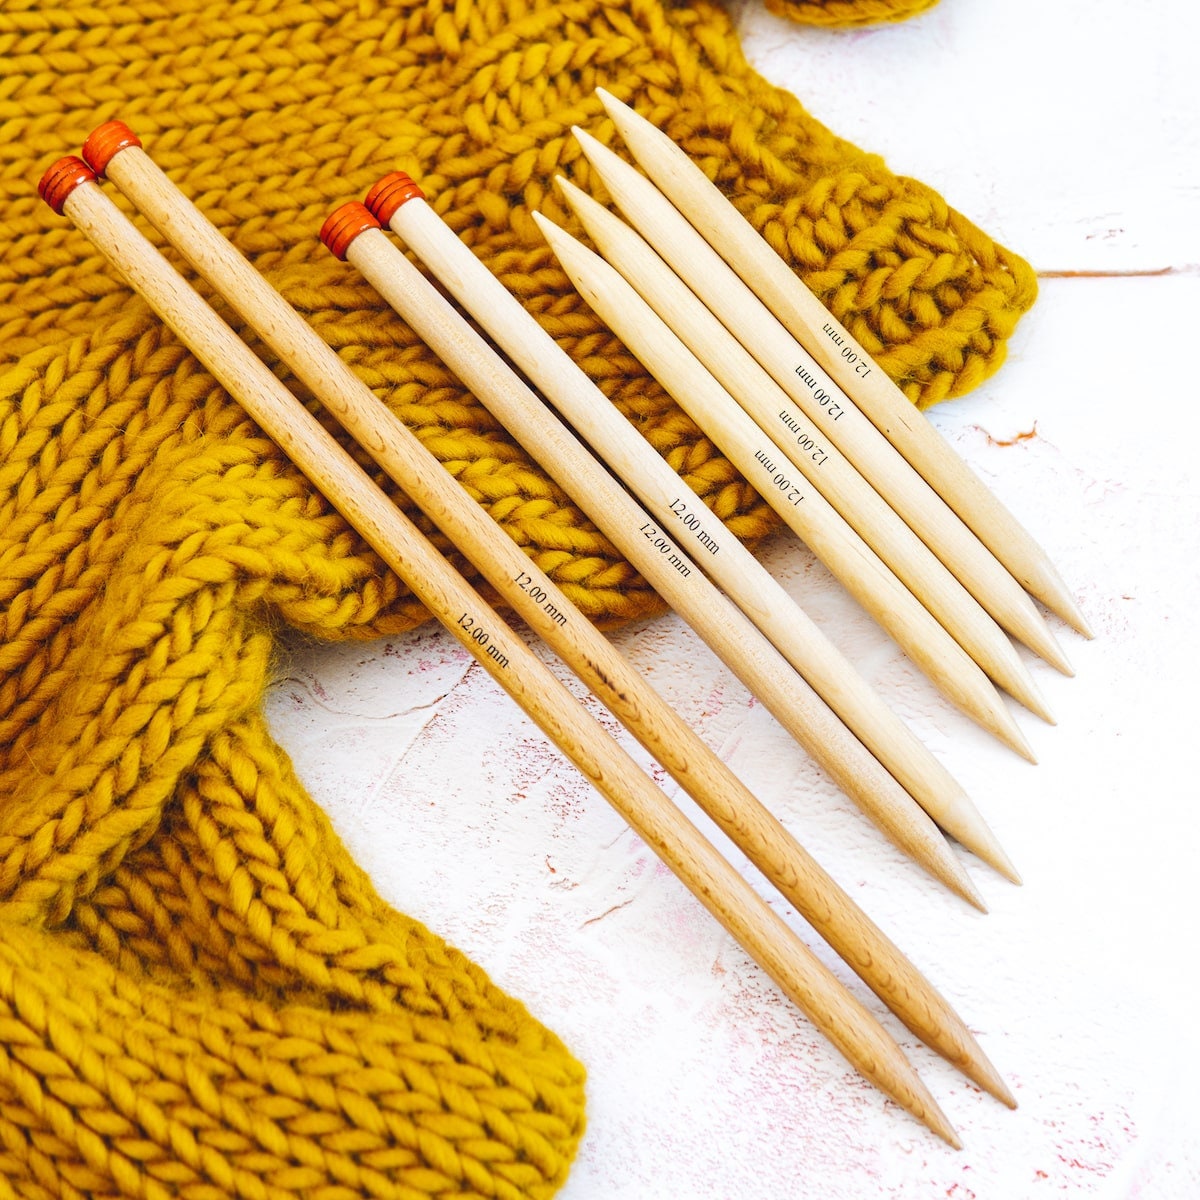 12mm Knitting Needles Circular Needles 12mm Double Pointed Needles 